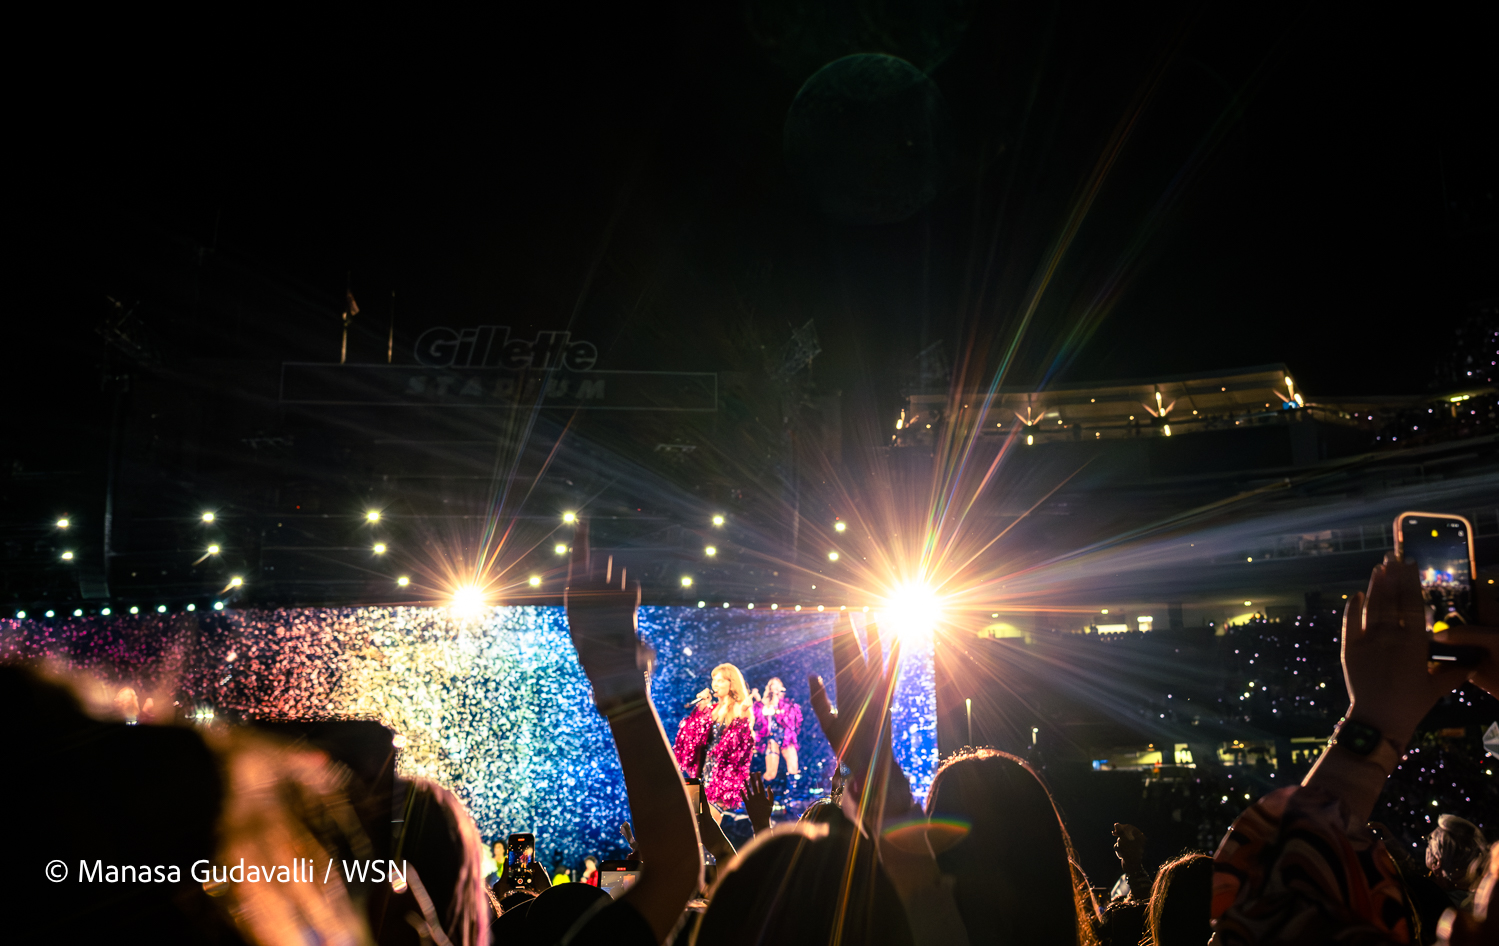 Taylor Swift performs before a crowd on the ground level of Gillette Stadium, wearing a sparkly pink and black leotard with long pink sleeves. Fans raise their hands up in the air as Swift performs in front of a background displaying live footage of her performance. Two bright yellow-white lights shine behind her.